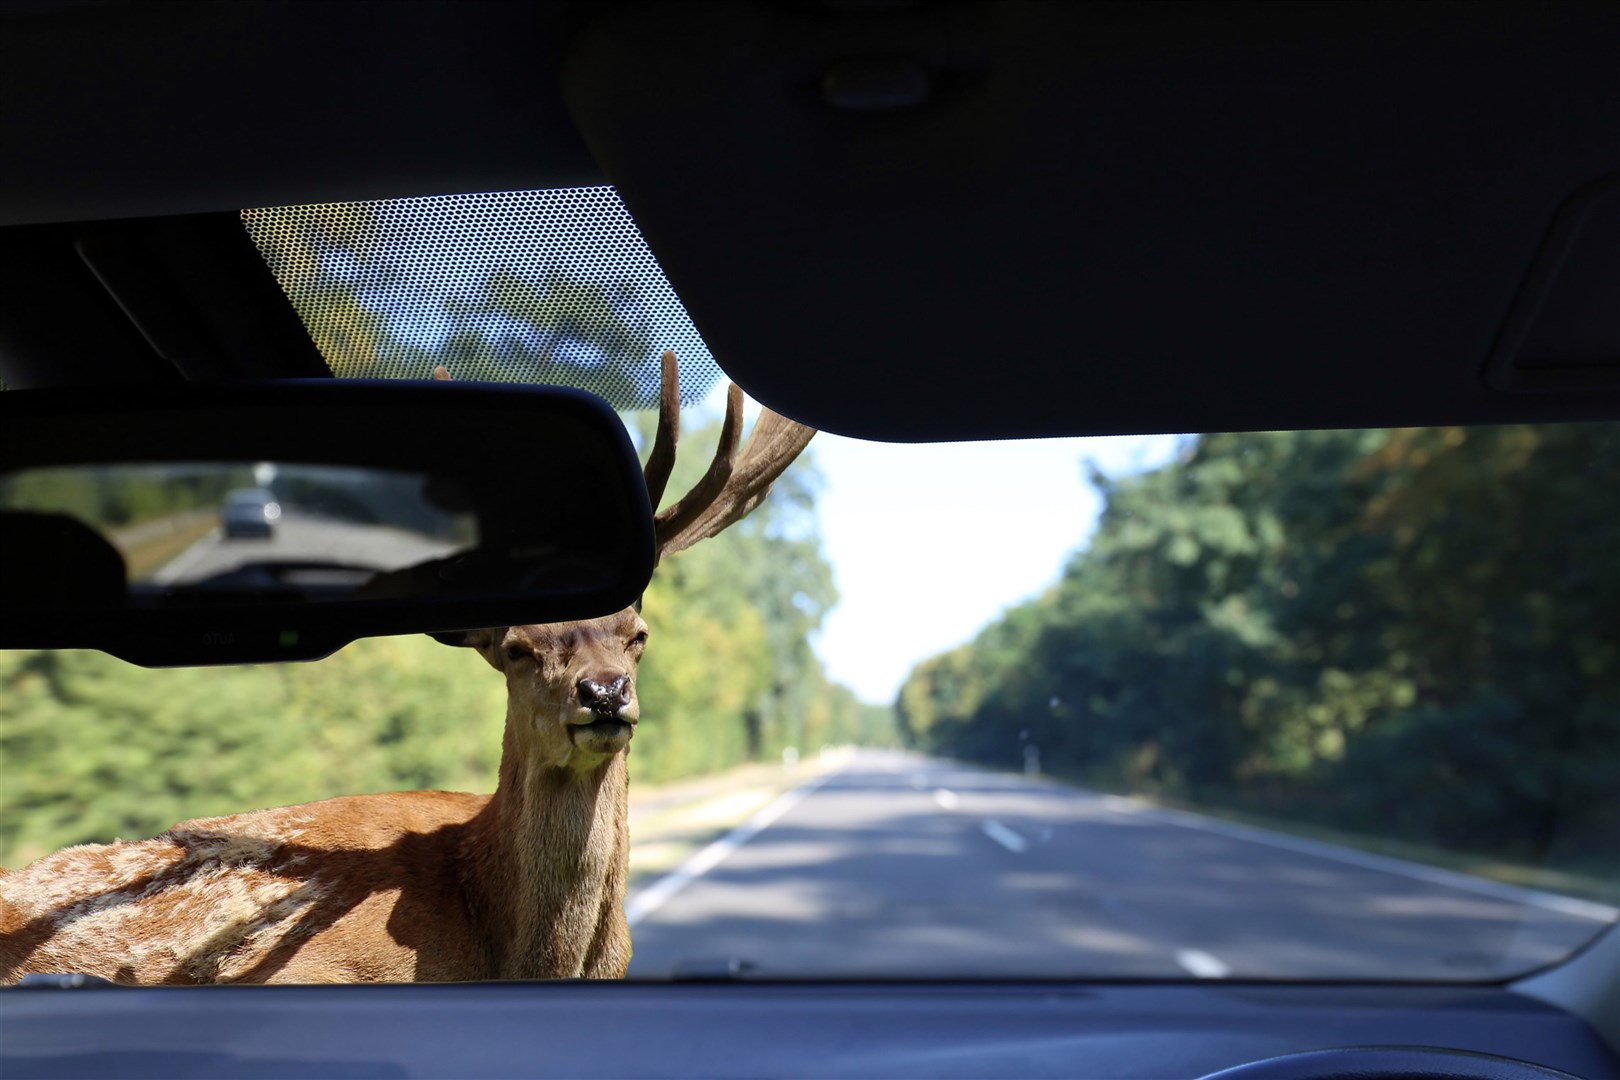 NatureScot has said that collisions between deer and vehicles could be as high as 9,000 a year in Scotland.